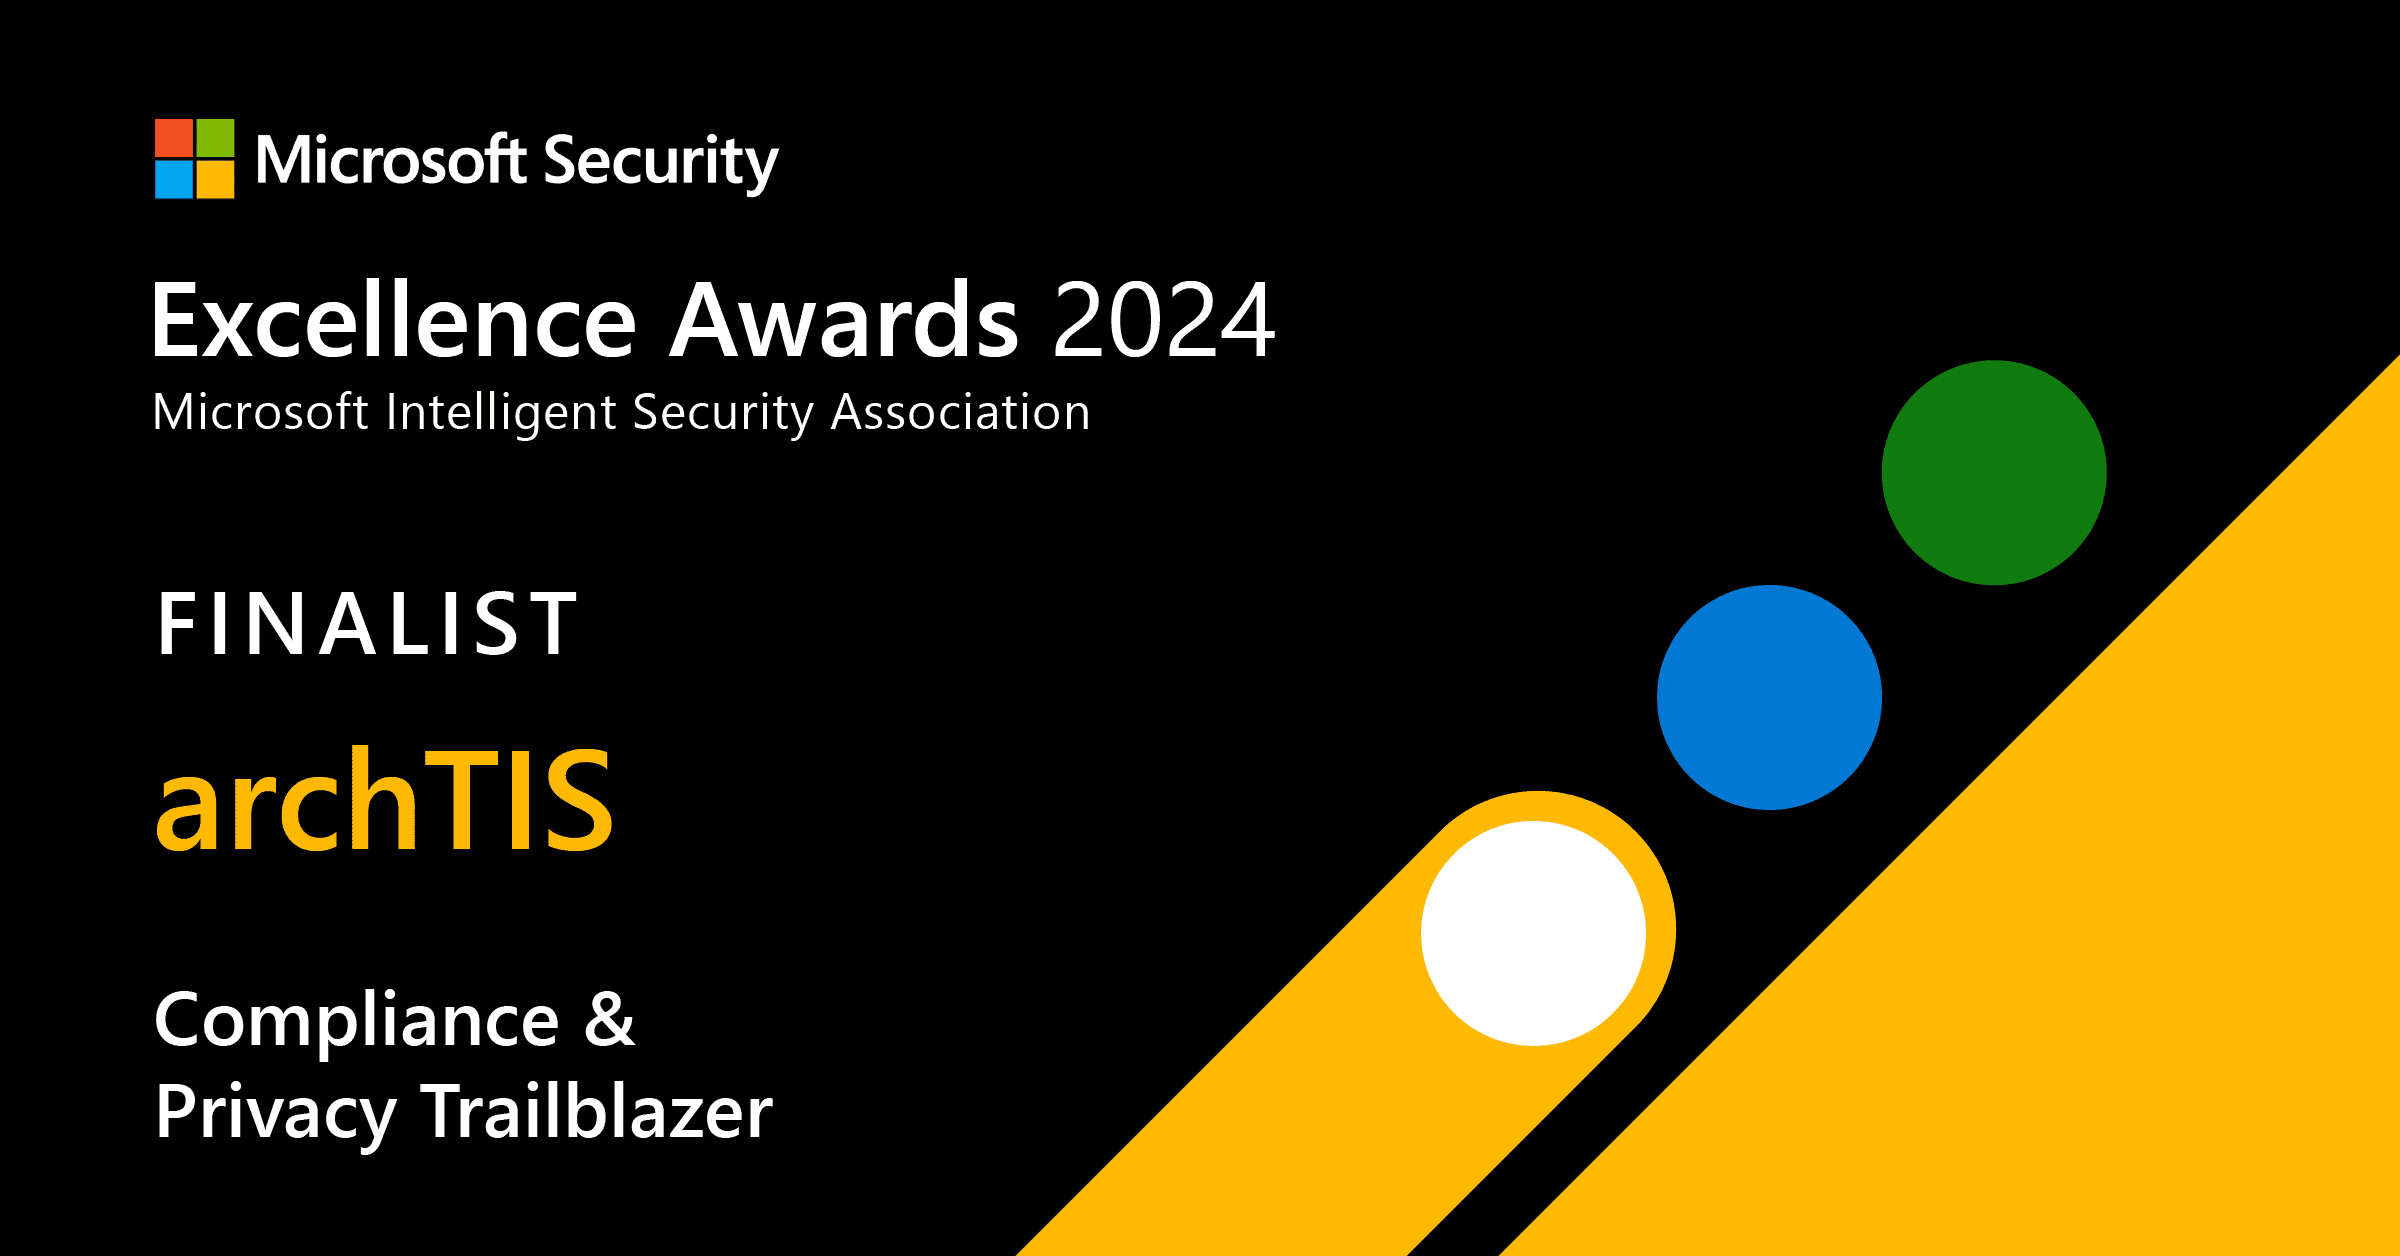 archTIS Recognized as a 2024 Microsoft Security Excellence Awards Finalist for Compliance & Privacy Trailblazer